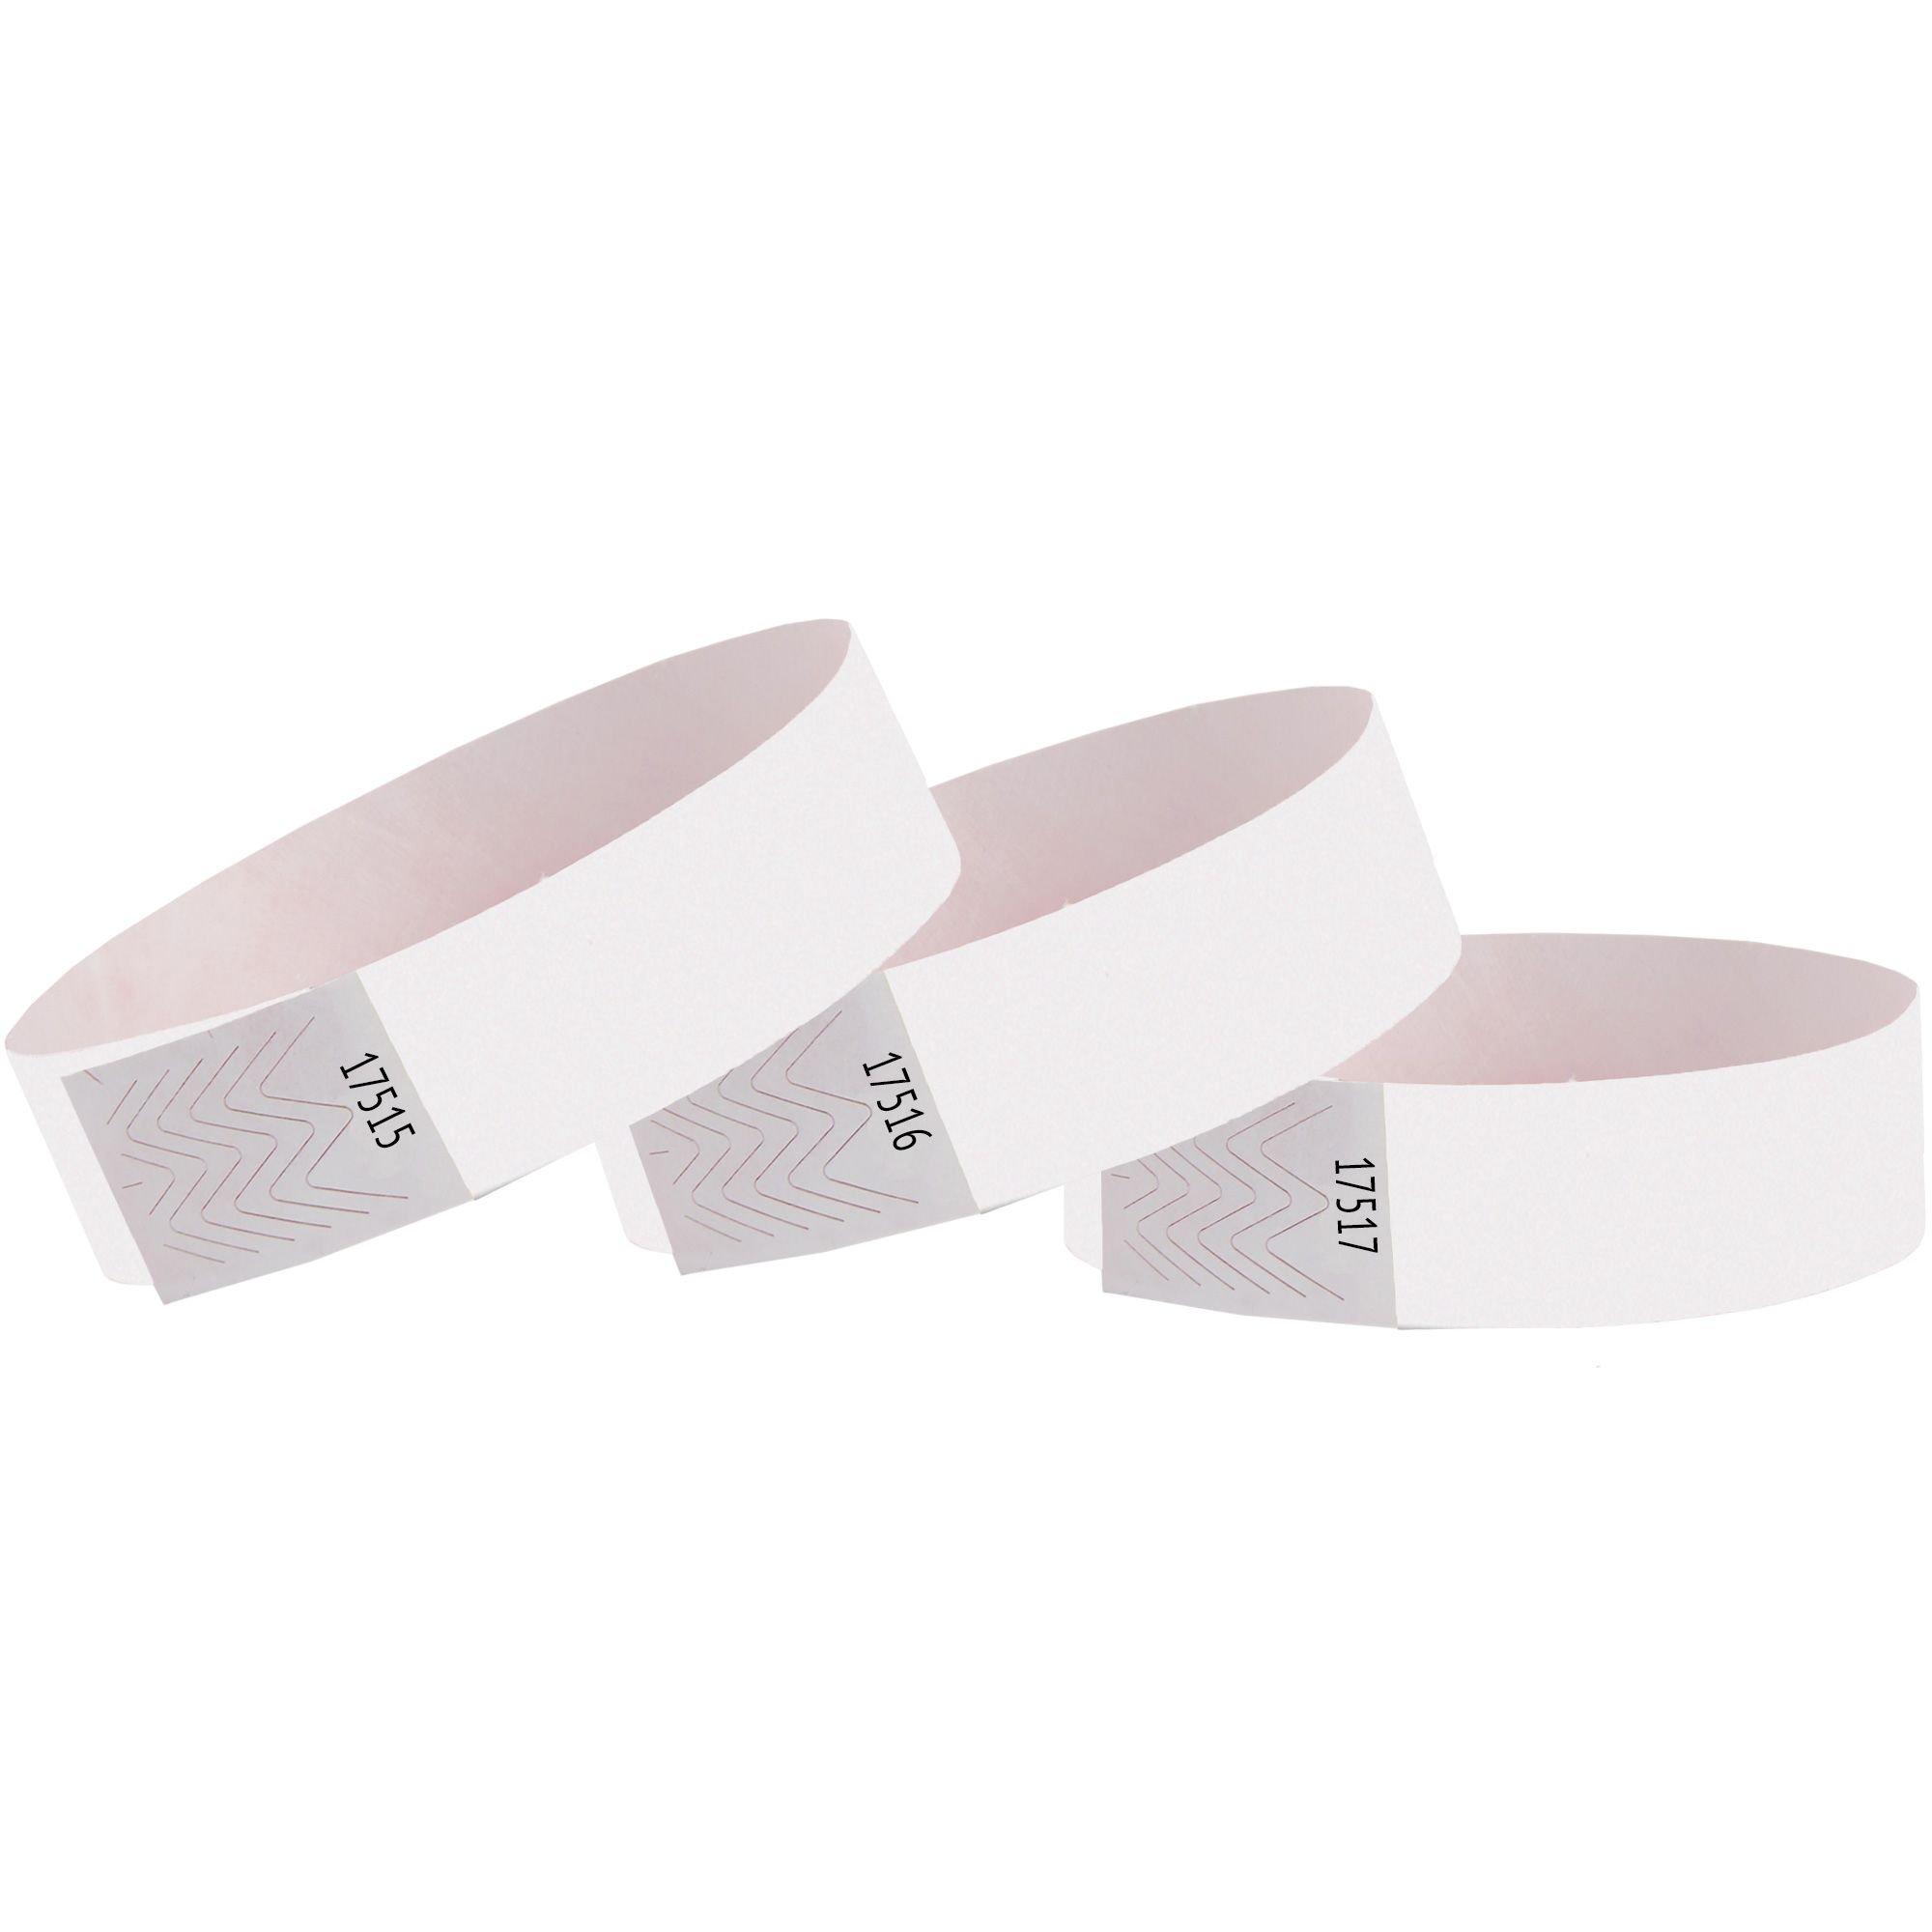 Paper Security Wristband